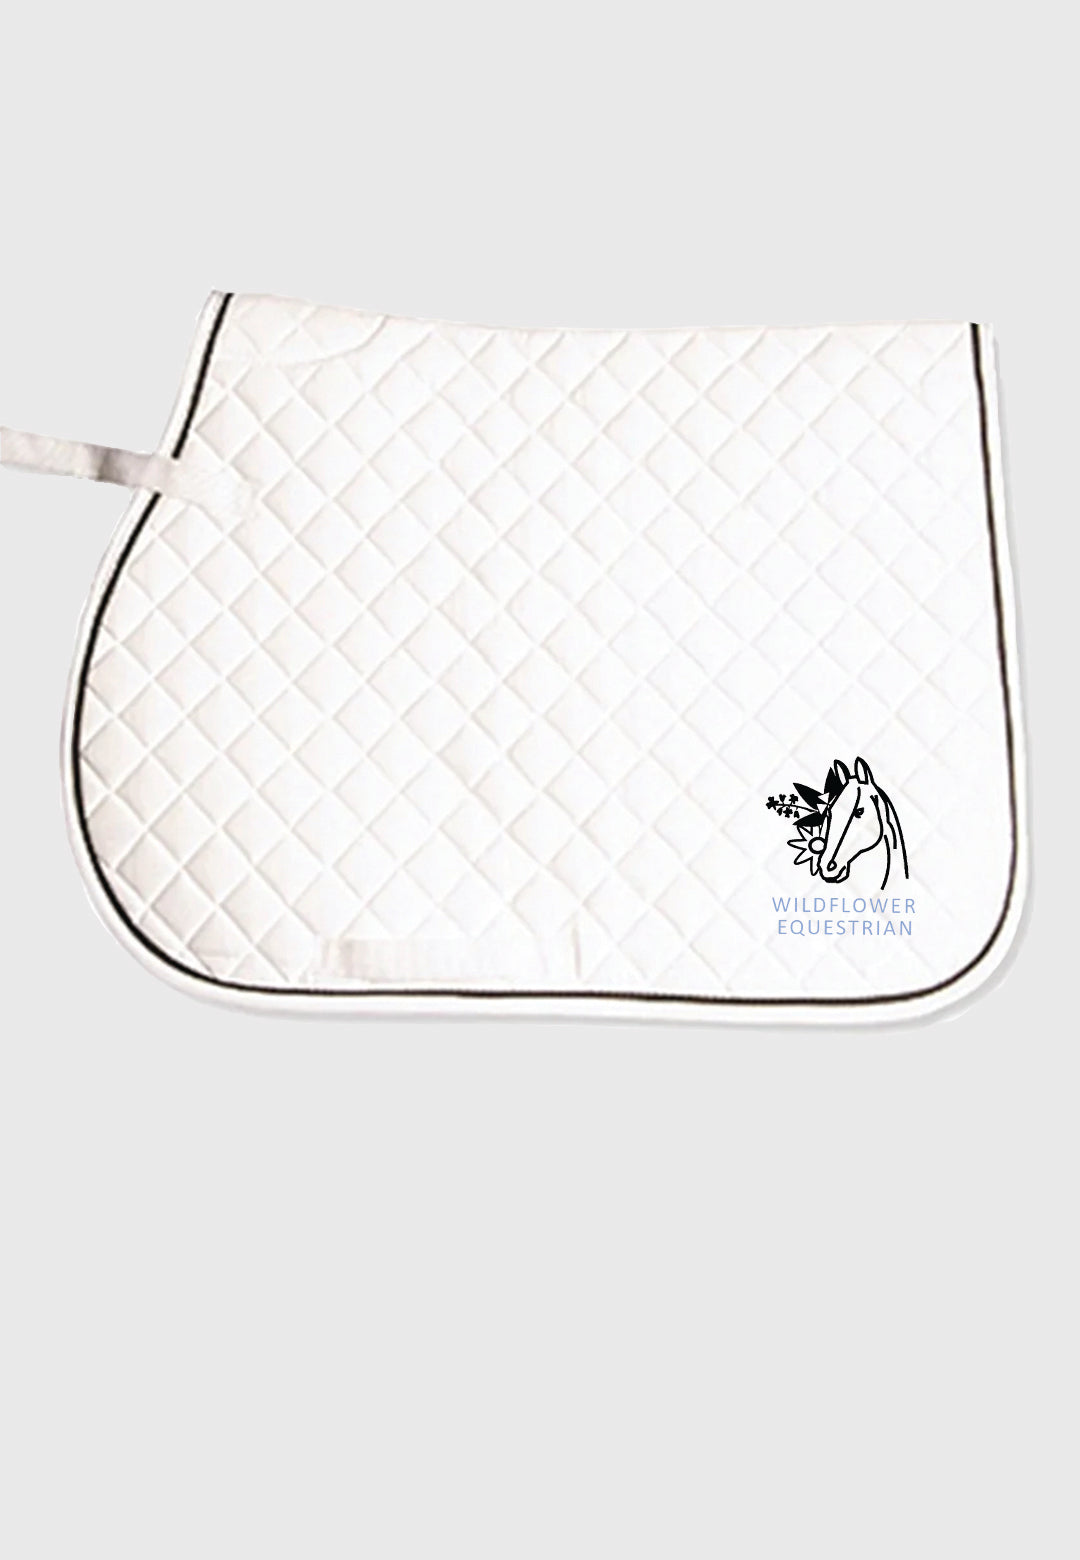 Wildflower Equestrian Jacks Imports All-Purpose Saddle Pad, 2 Piping Color Options